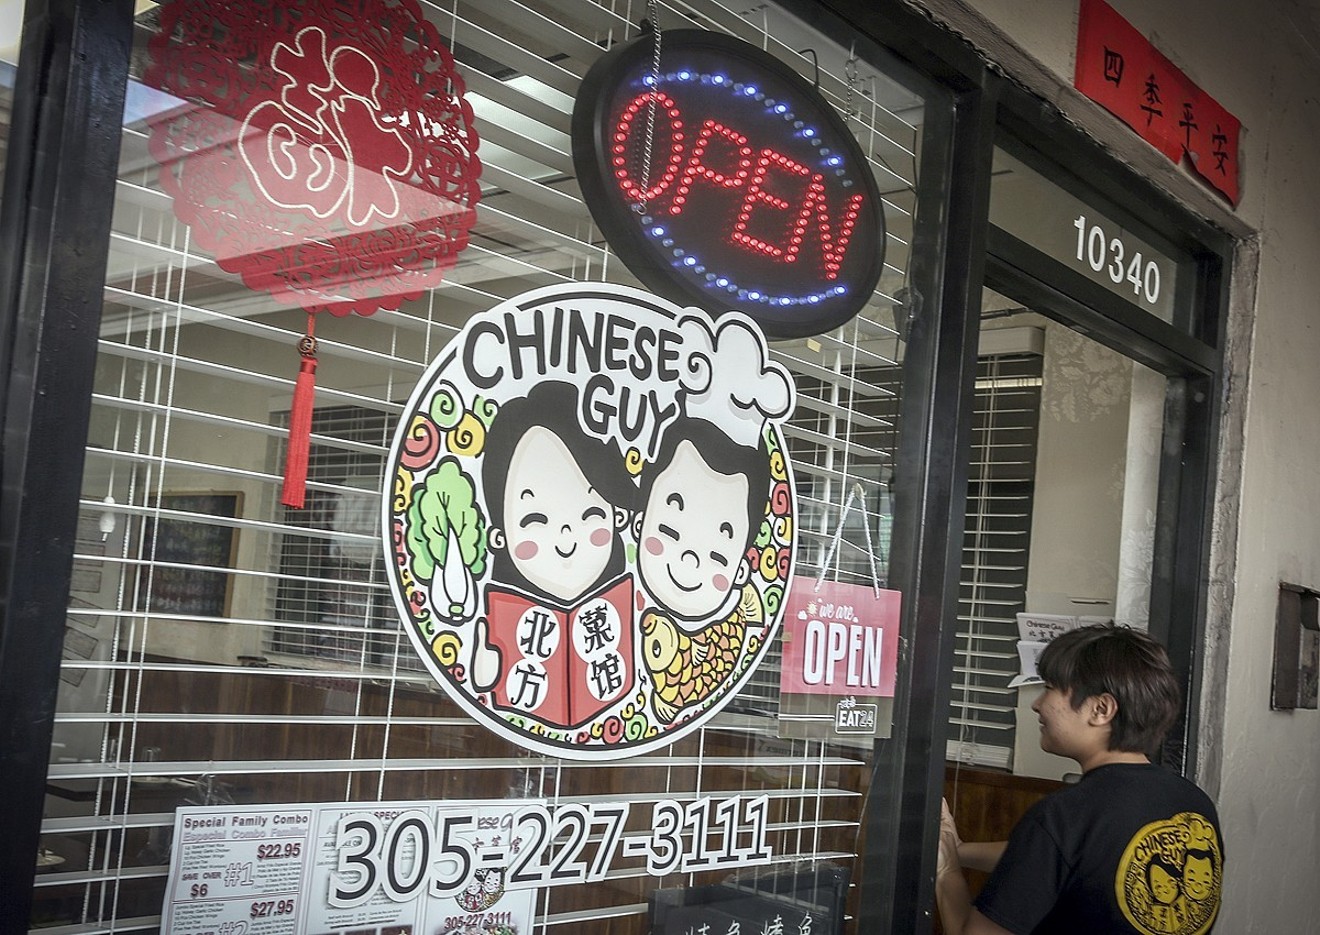 Sweetwater's Chinese Guy Chi-Town and other restaurants throughout South Florida have suffered a drop in business since coronavirus has spread.